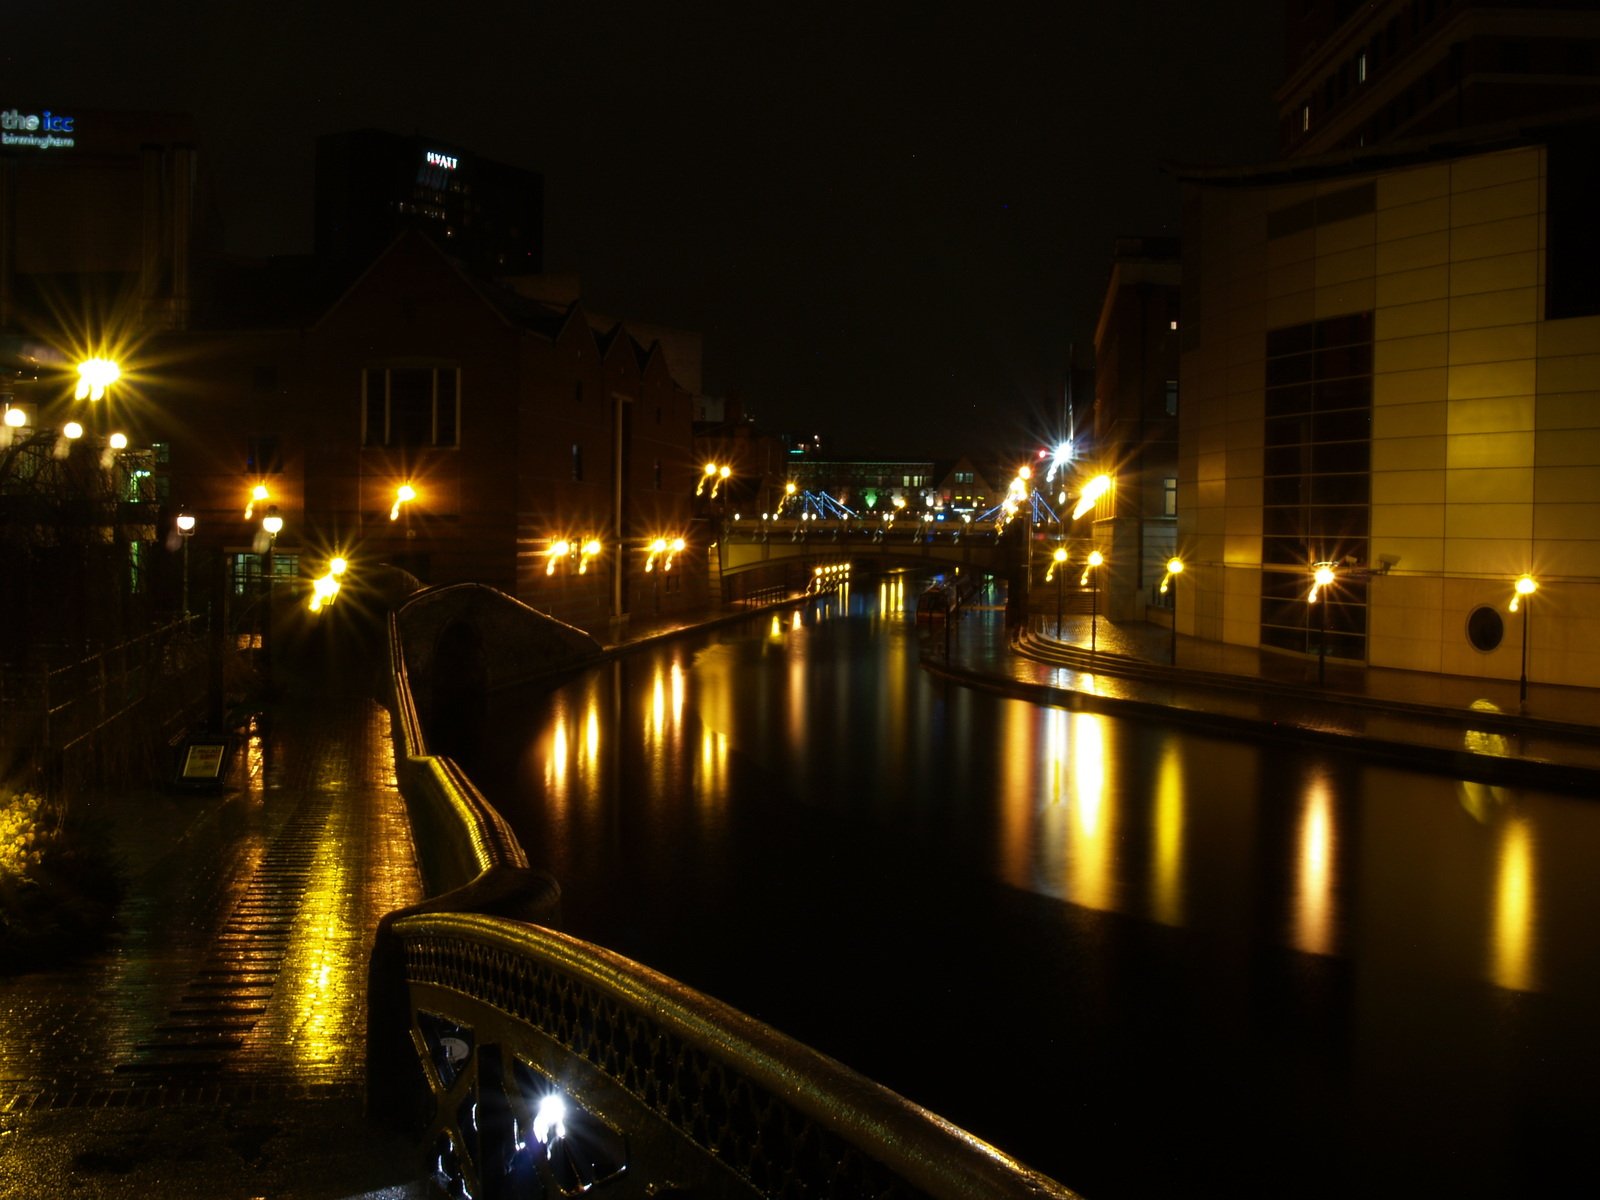 lights shine brightly over the river at night